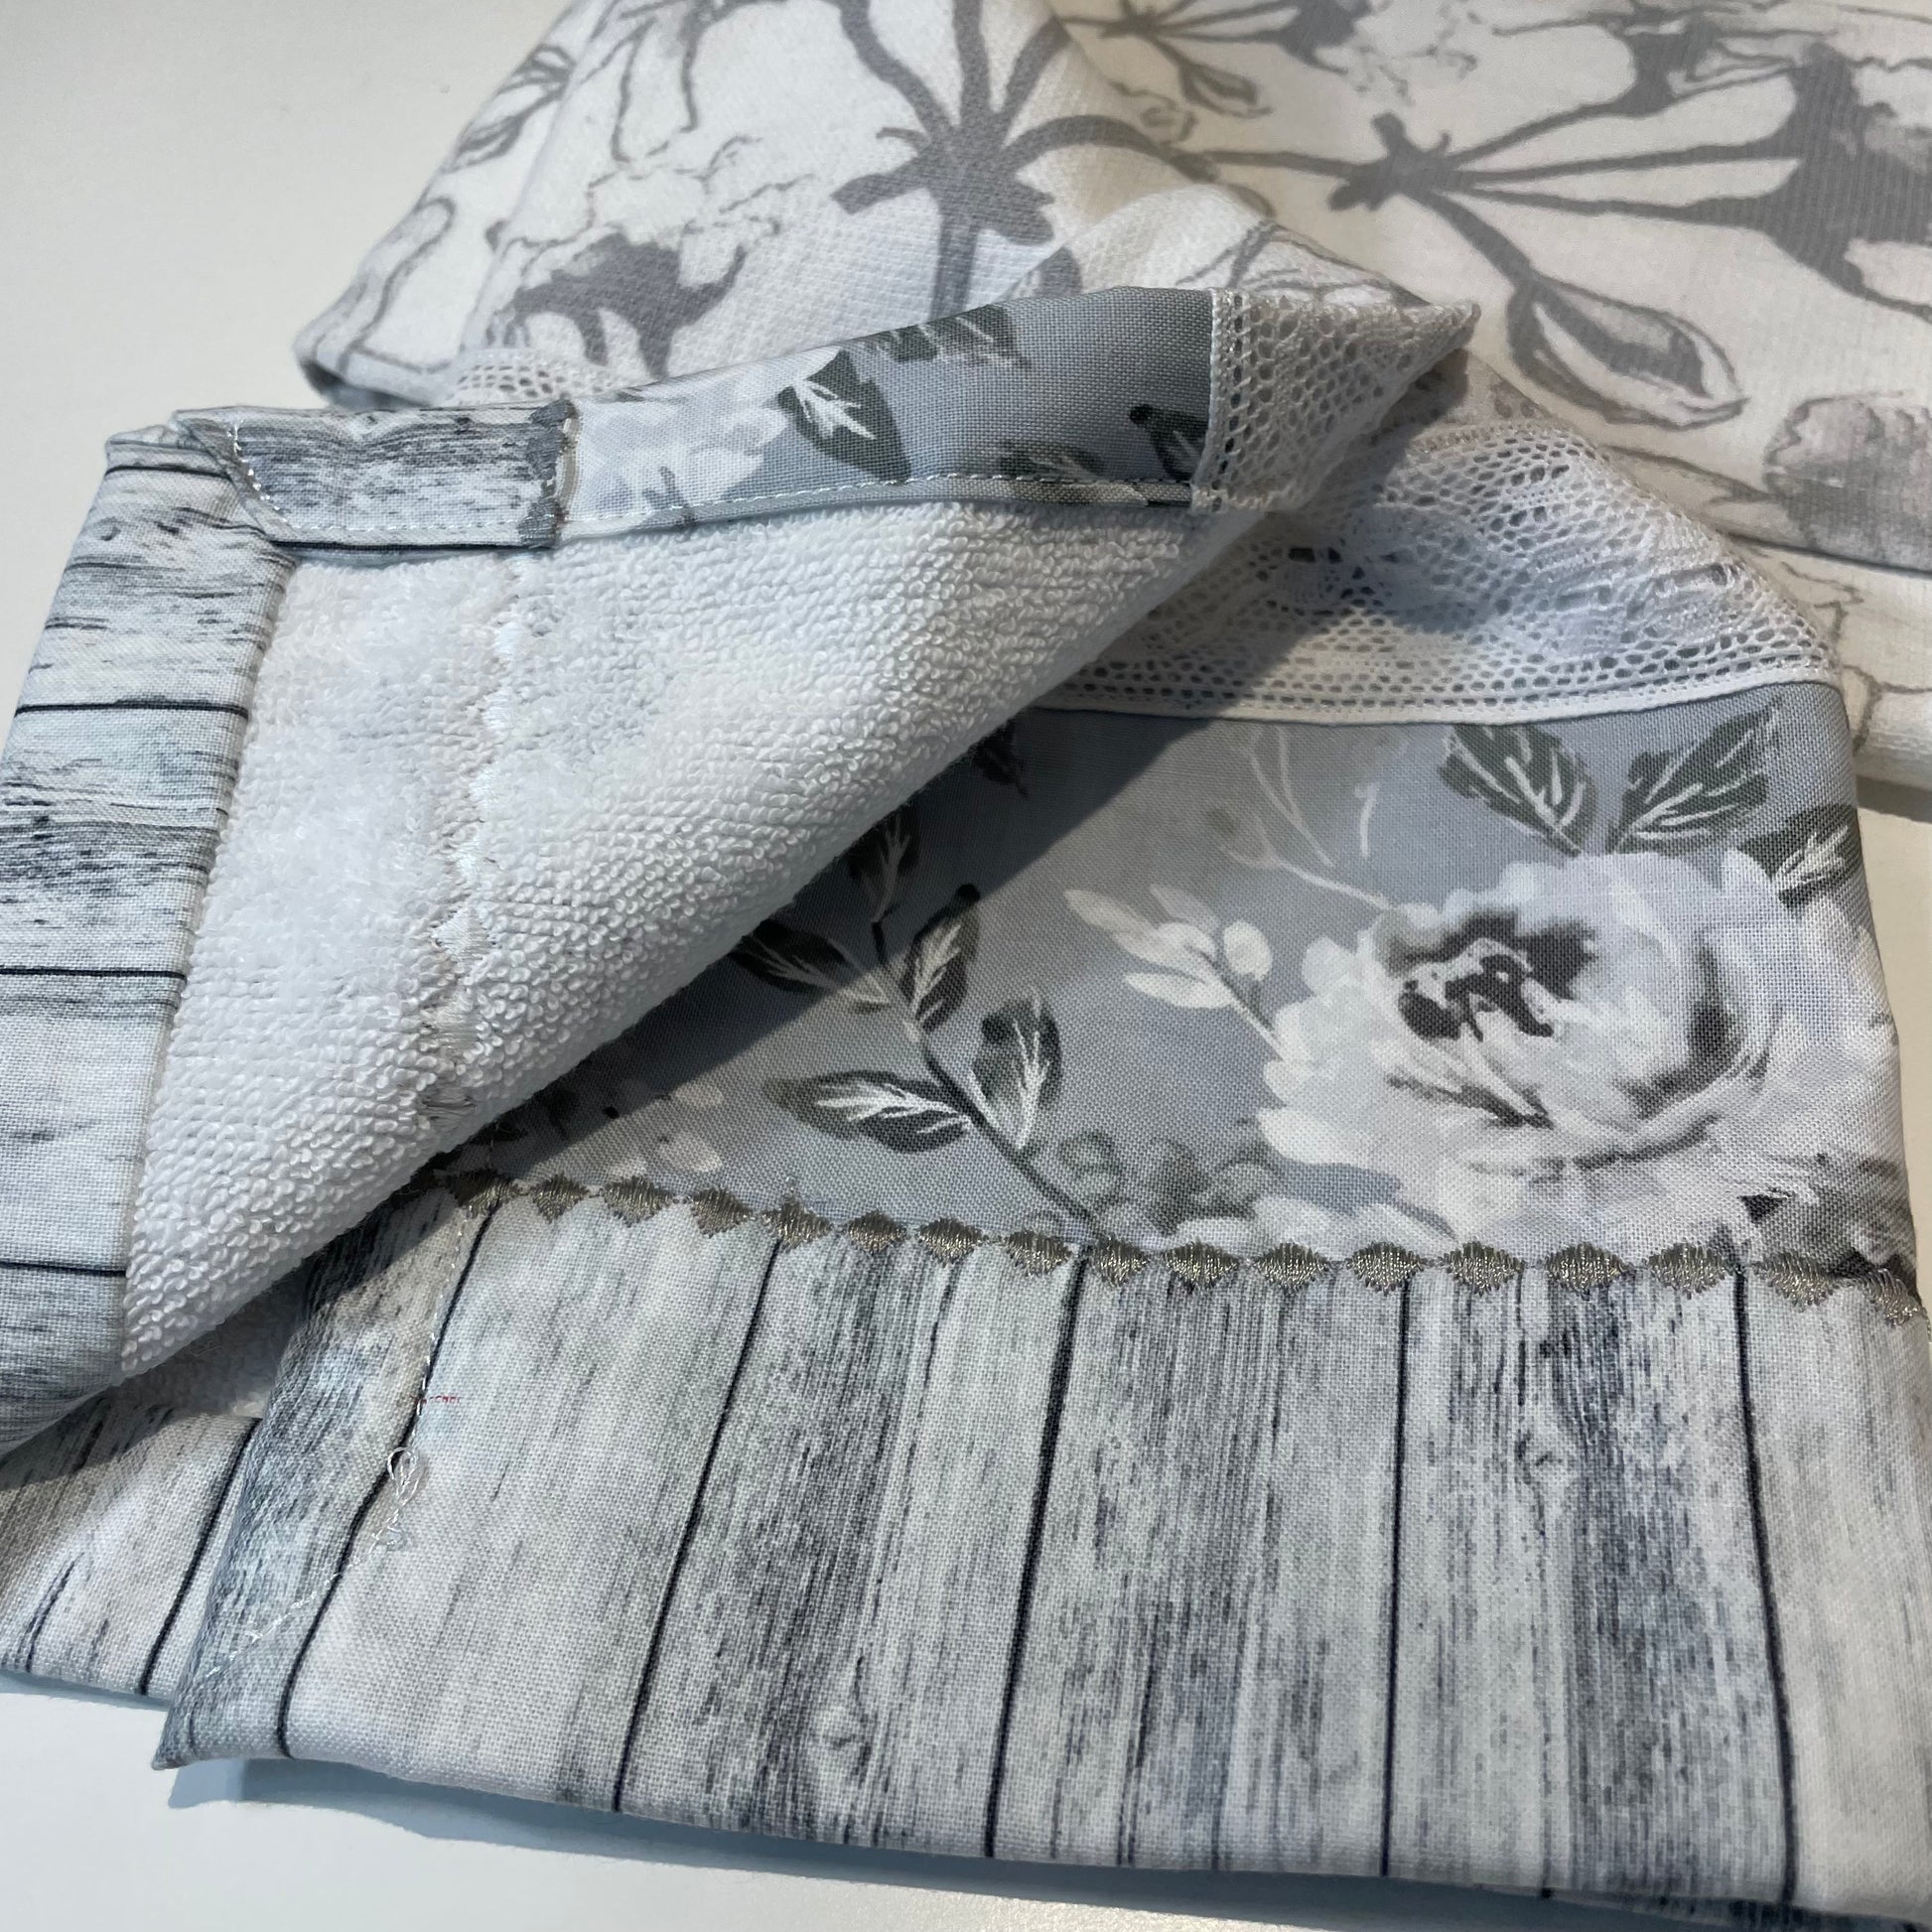 Grey and White Kitchen Dish Towel, Cute Handcrafted Modern Farmhouse Tea Towel - Home Stitchery Decor